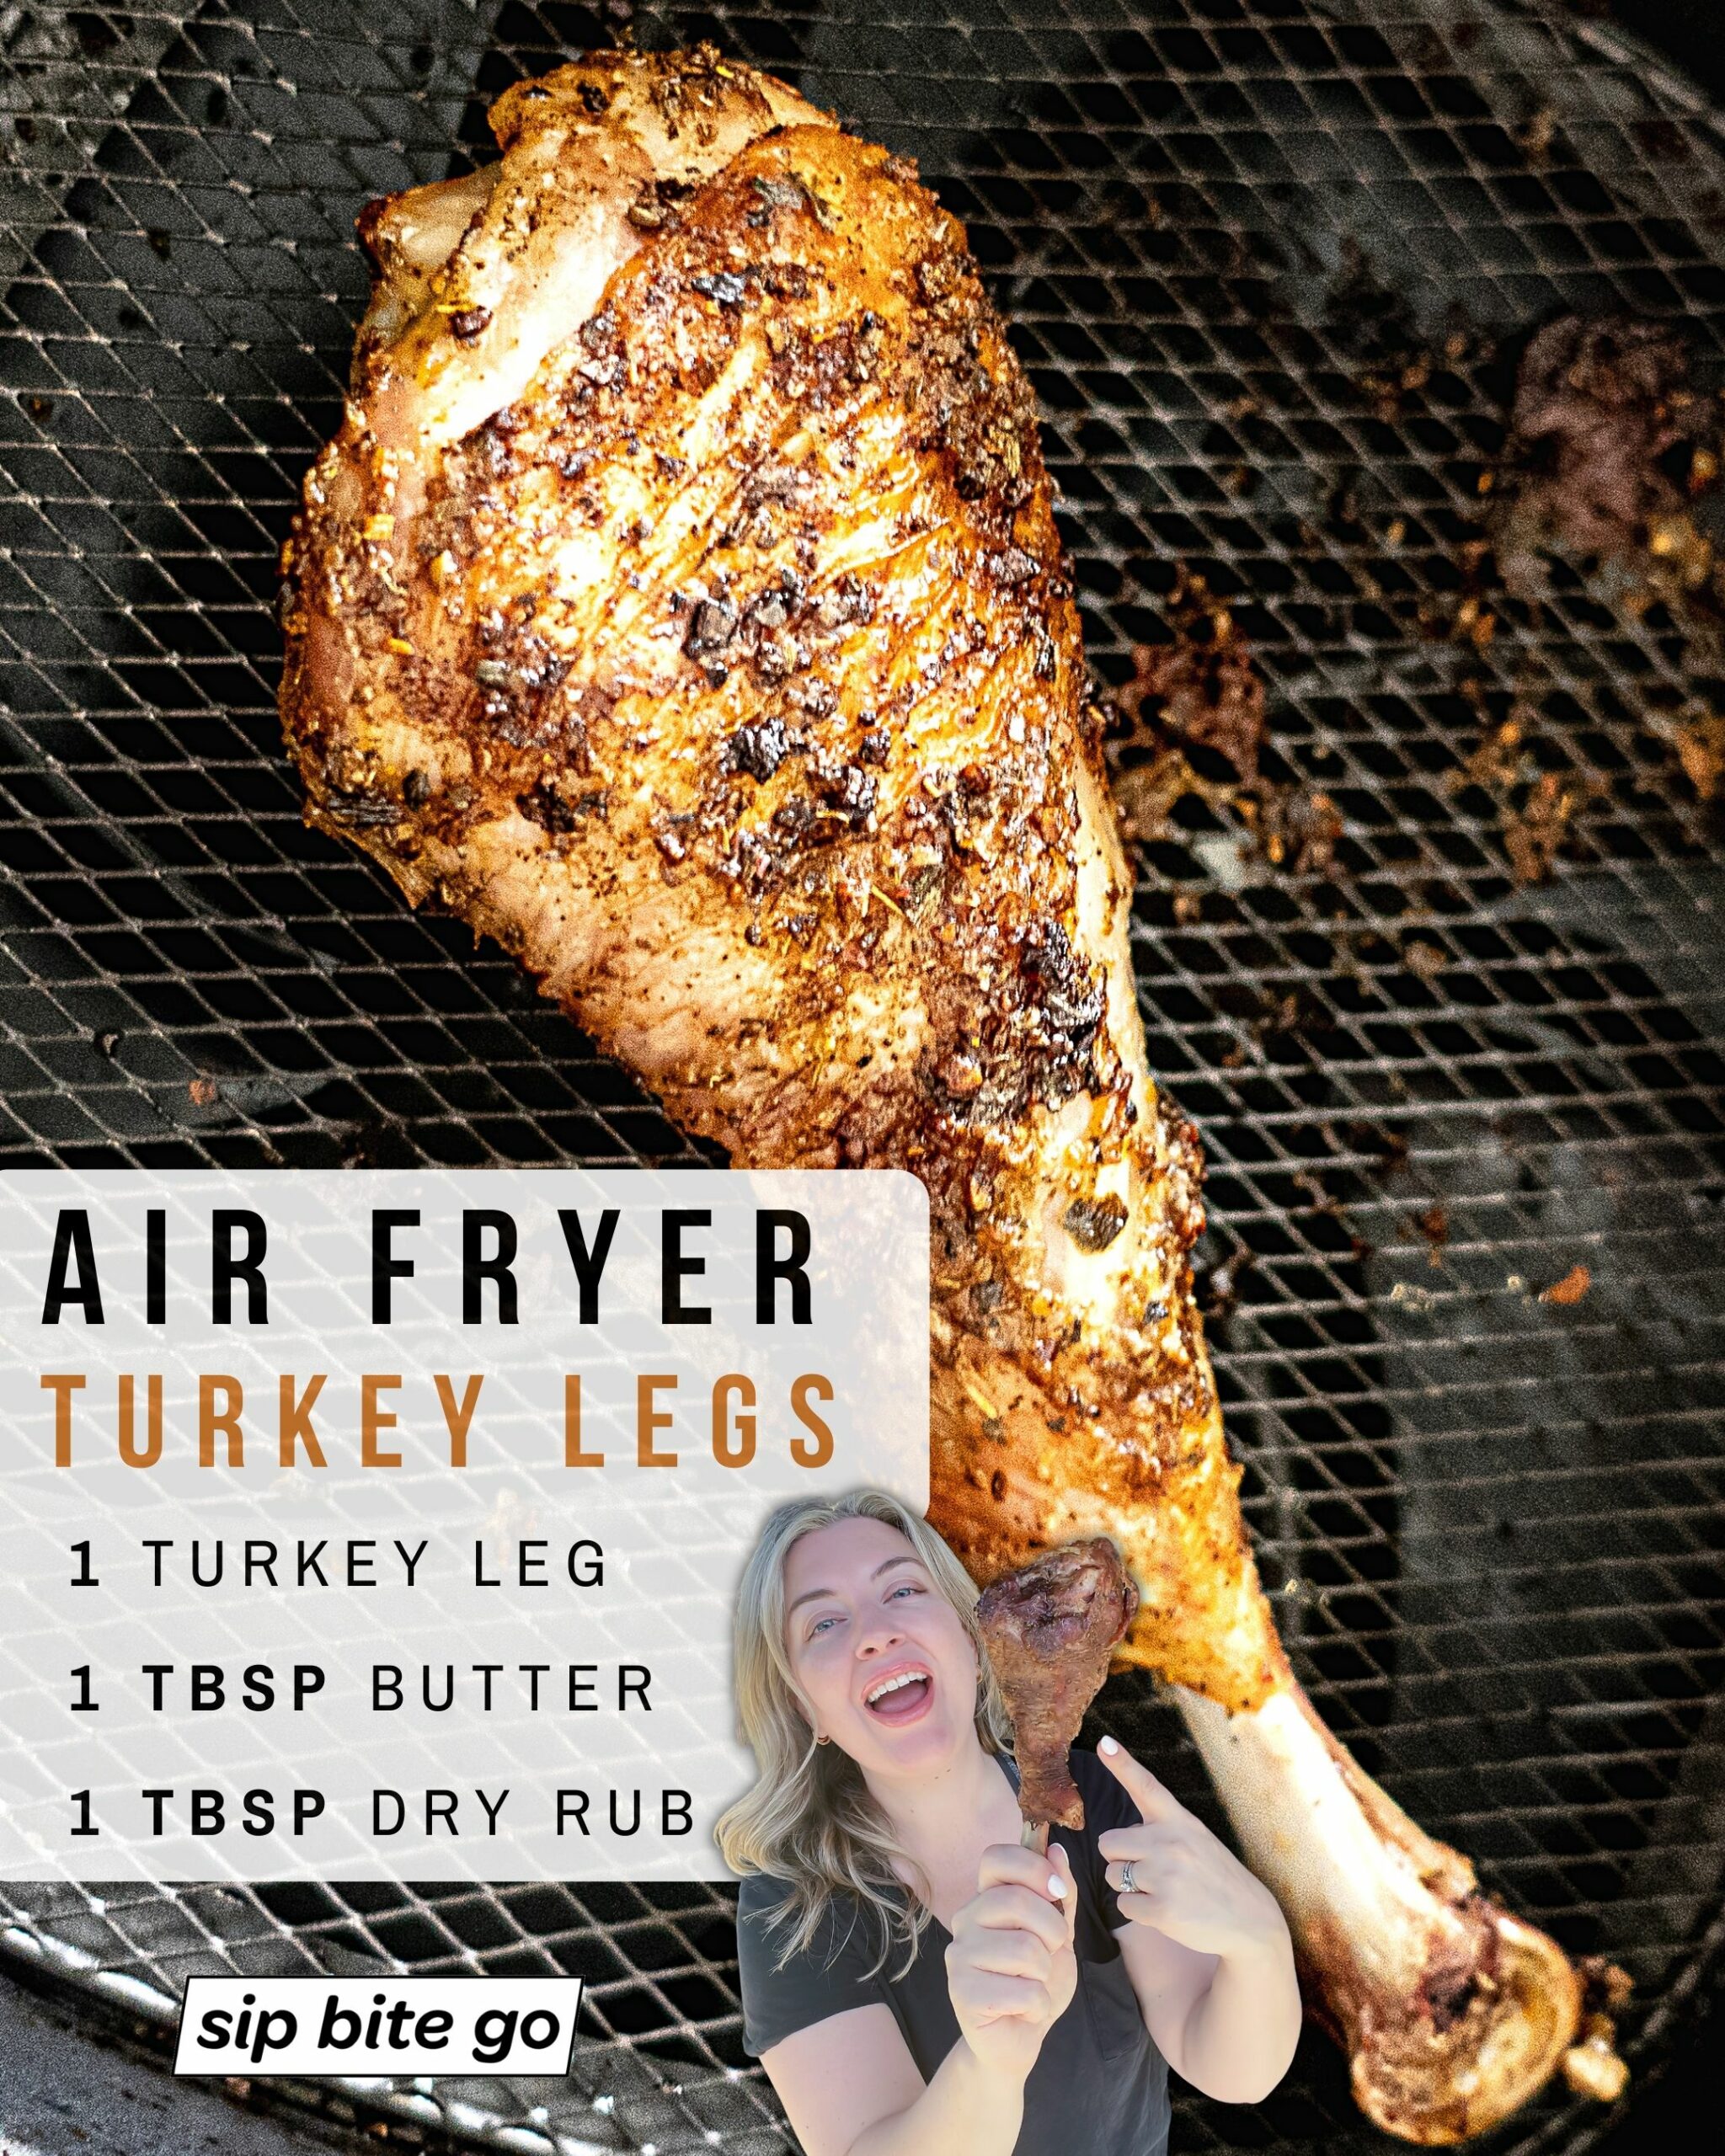 Infographic with ingredients list for making air fryer turkey legs with Jenna Passaro food blogger from Sip Bite Go